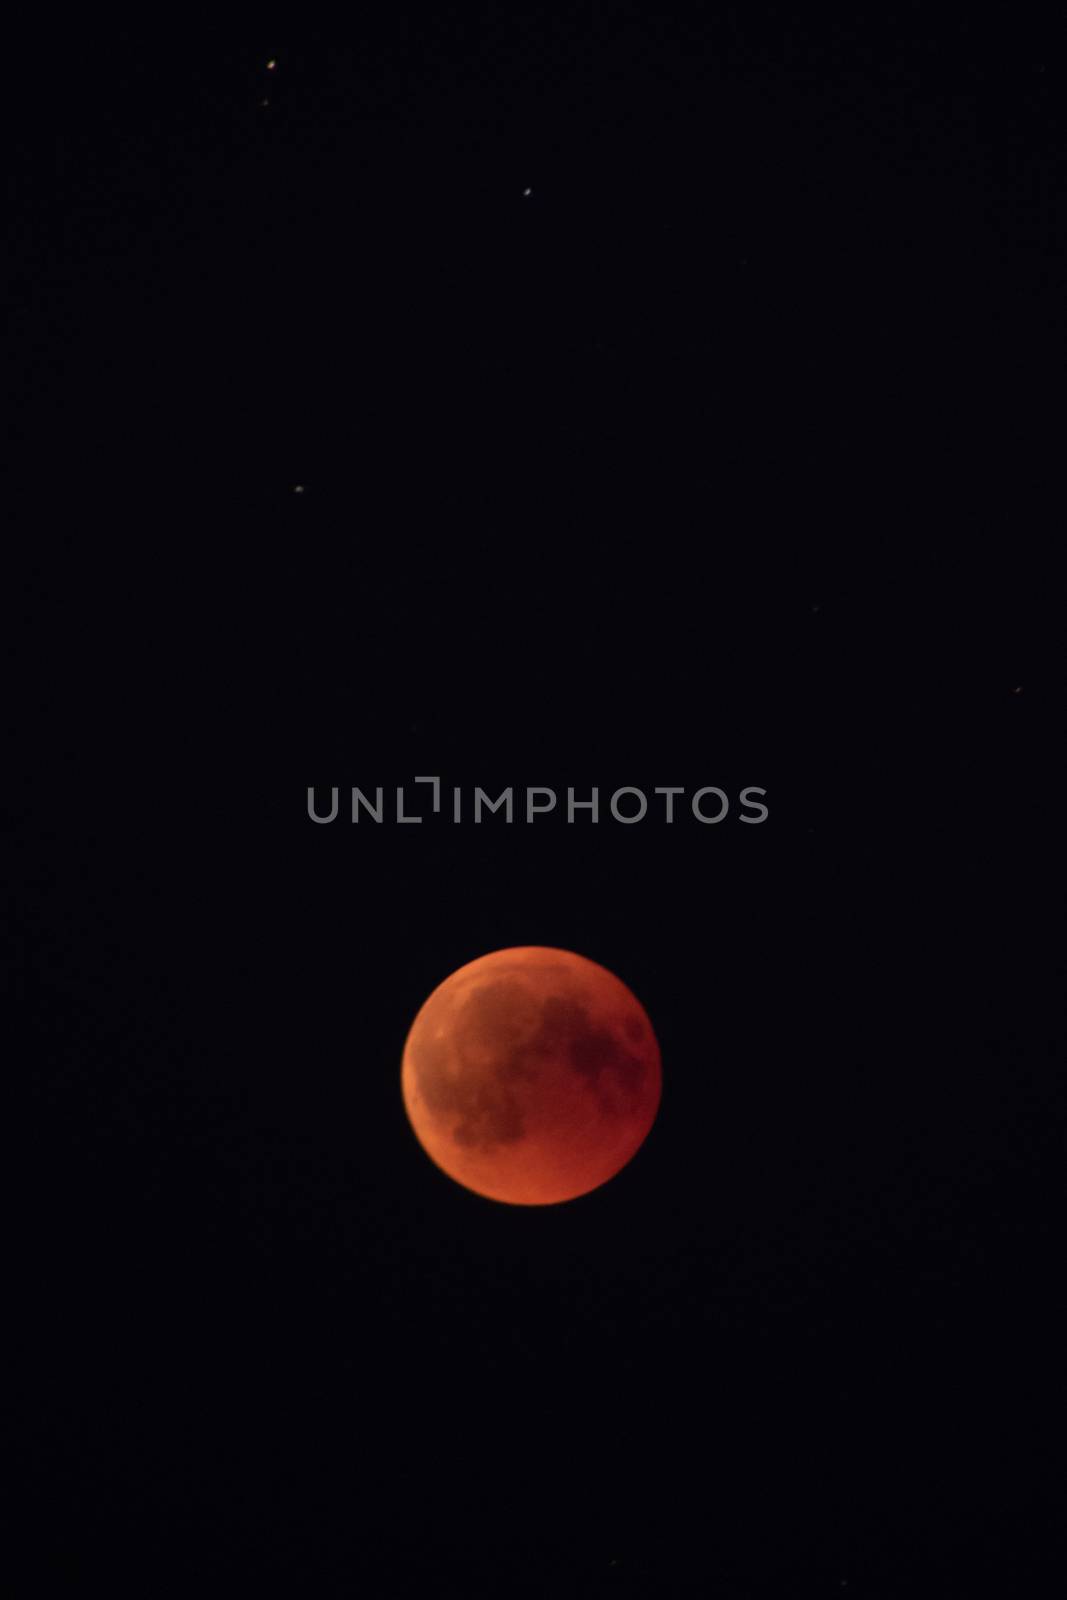 Blood moon at its most red moment in black night sky by MXW_Stock